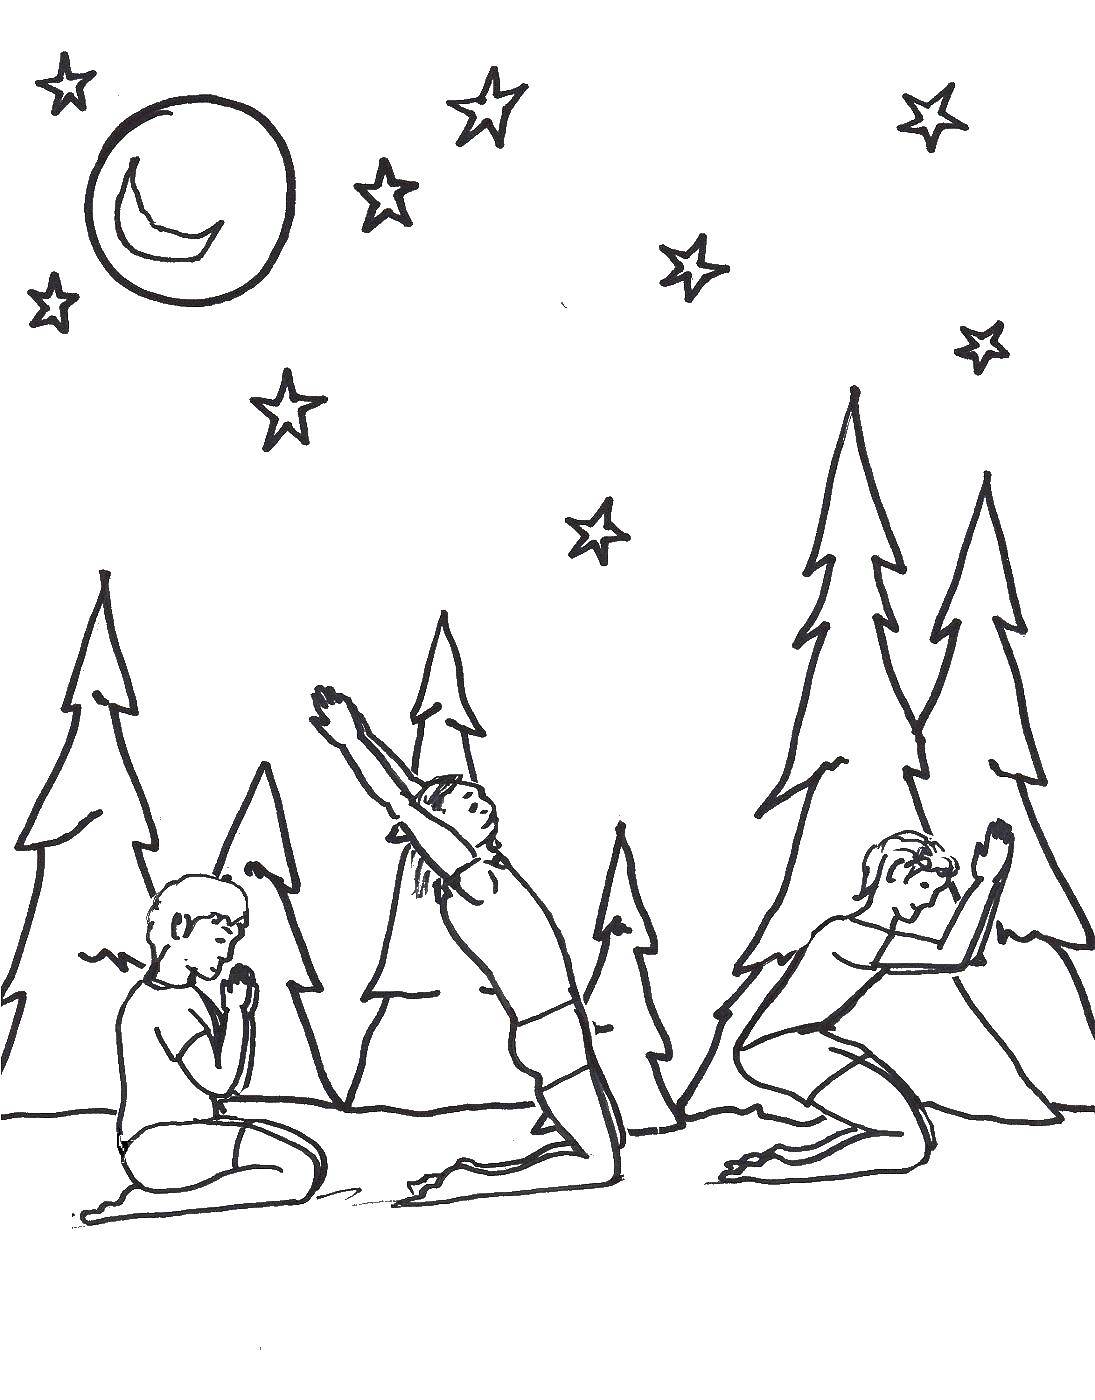 Coloring People do yoga outdoors in the woods. Category yoga. Tags:  forest, sport, nature.